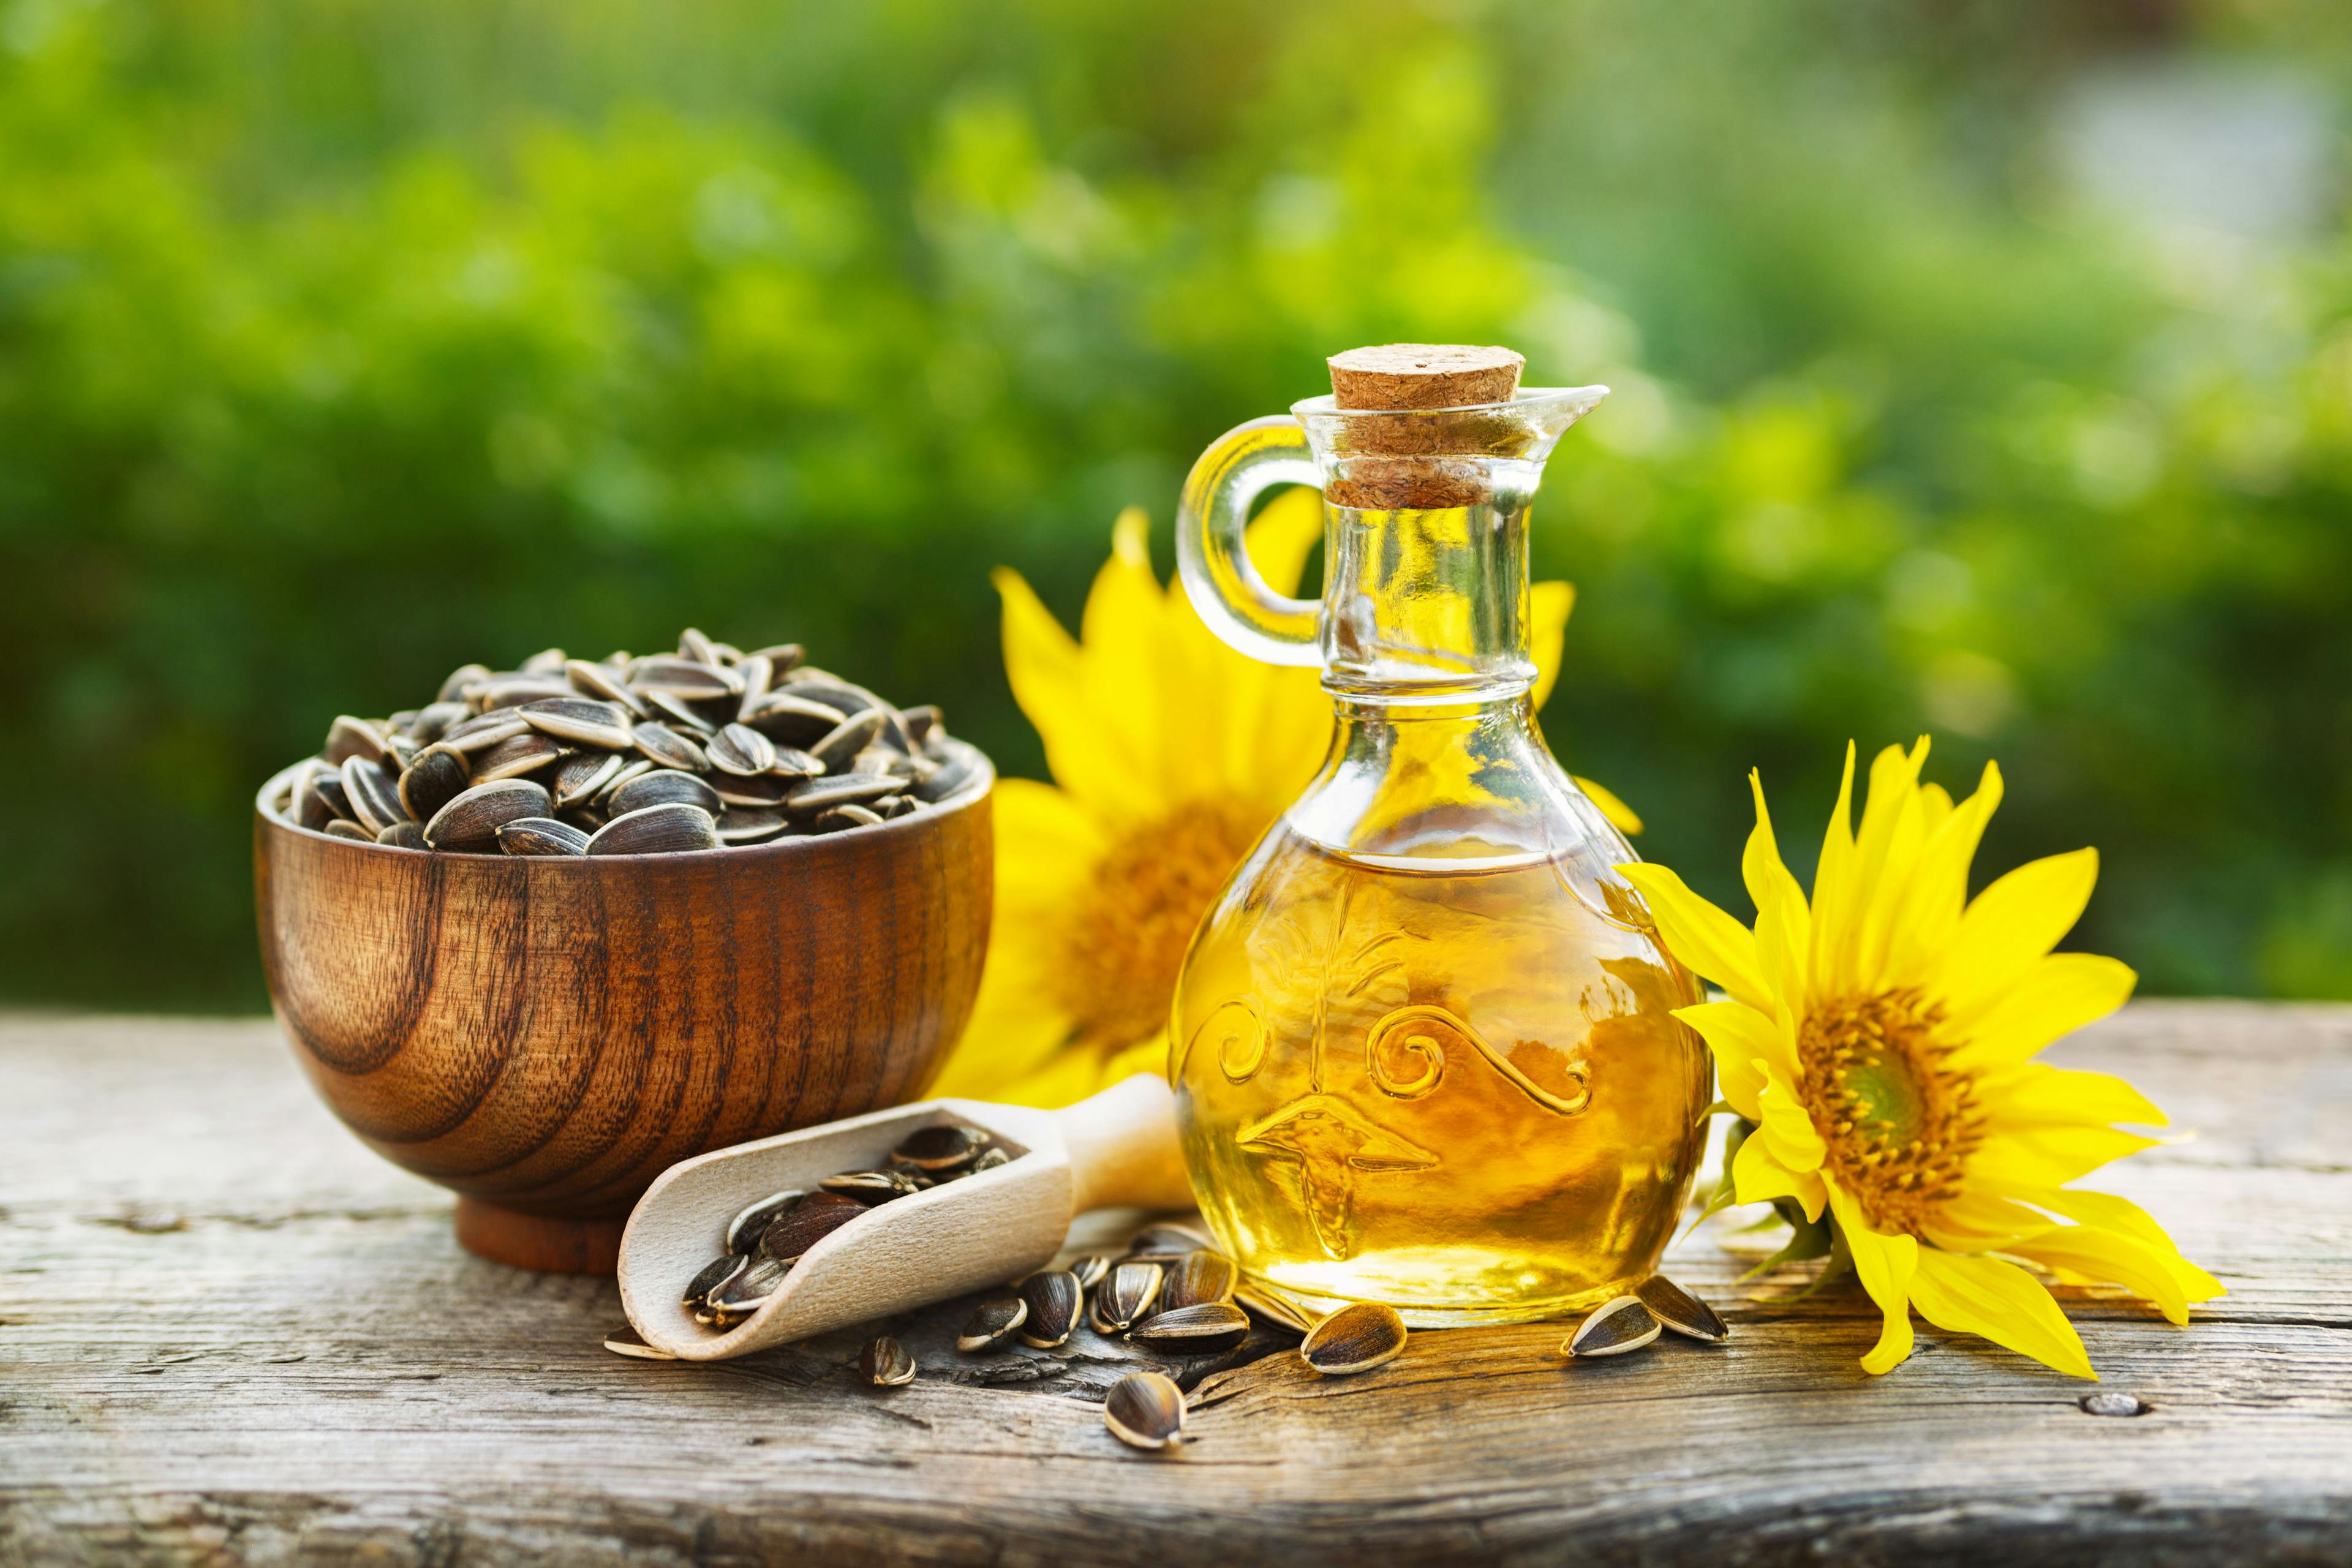 Organic sunflower oil in a small glass jar with sunflower seeds and fresh flowers. Outdoors | Image Credit: © valya82 - stock.adobe.com 